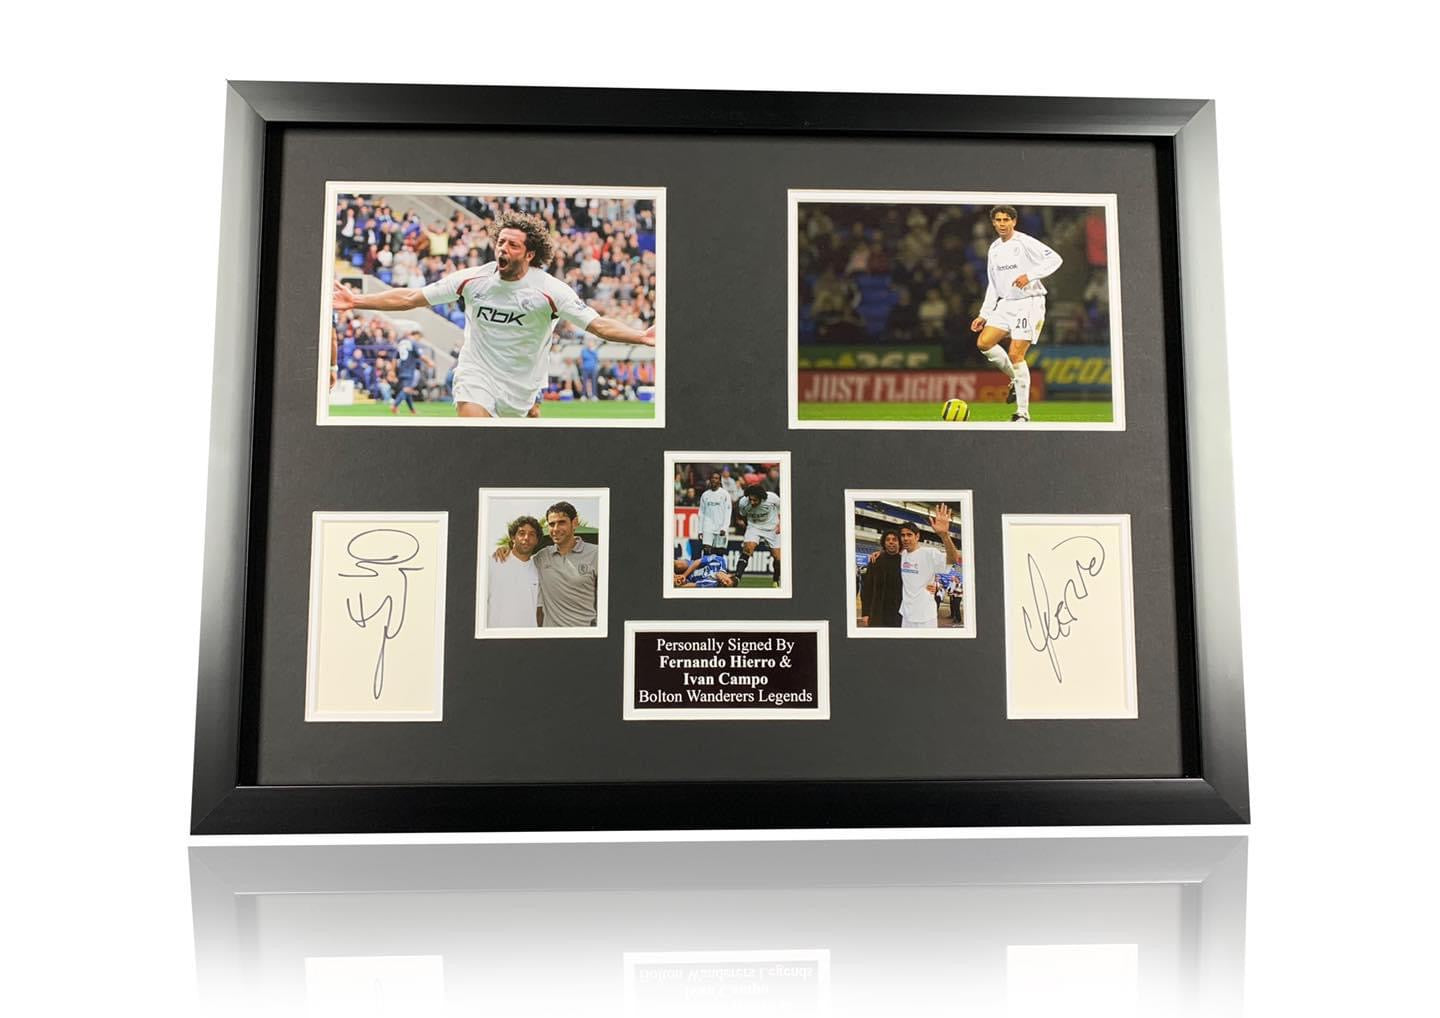 Ivan Campo and Fernando Hierro dual signed framed photo montage